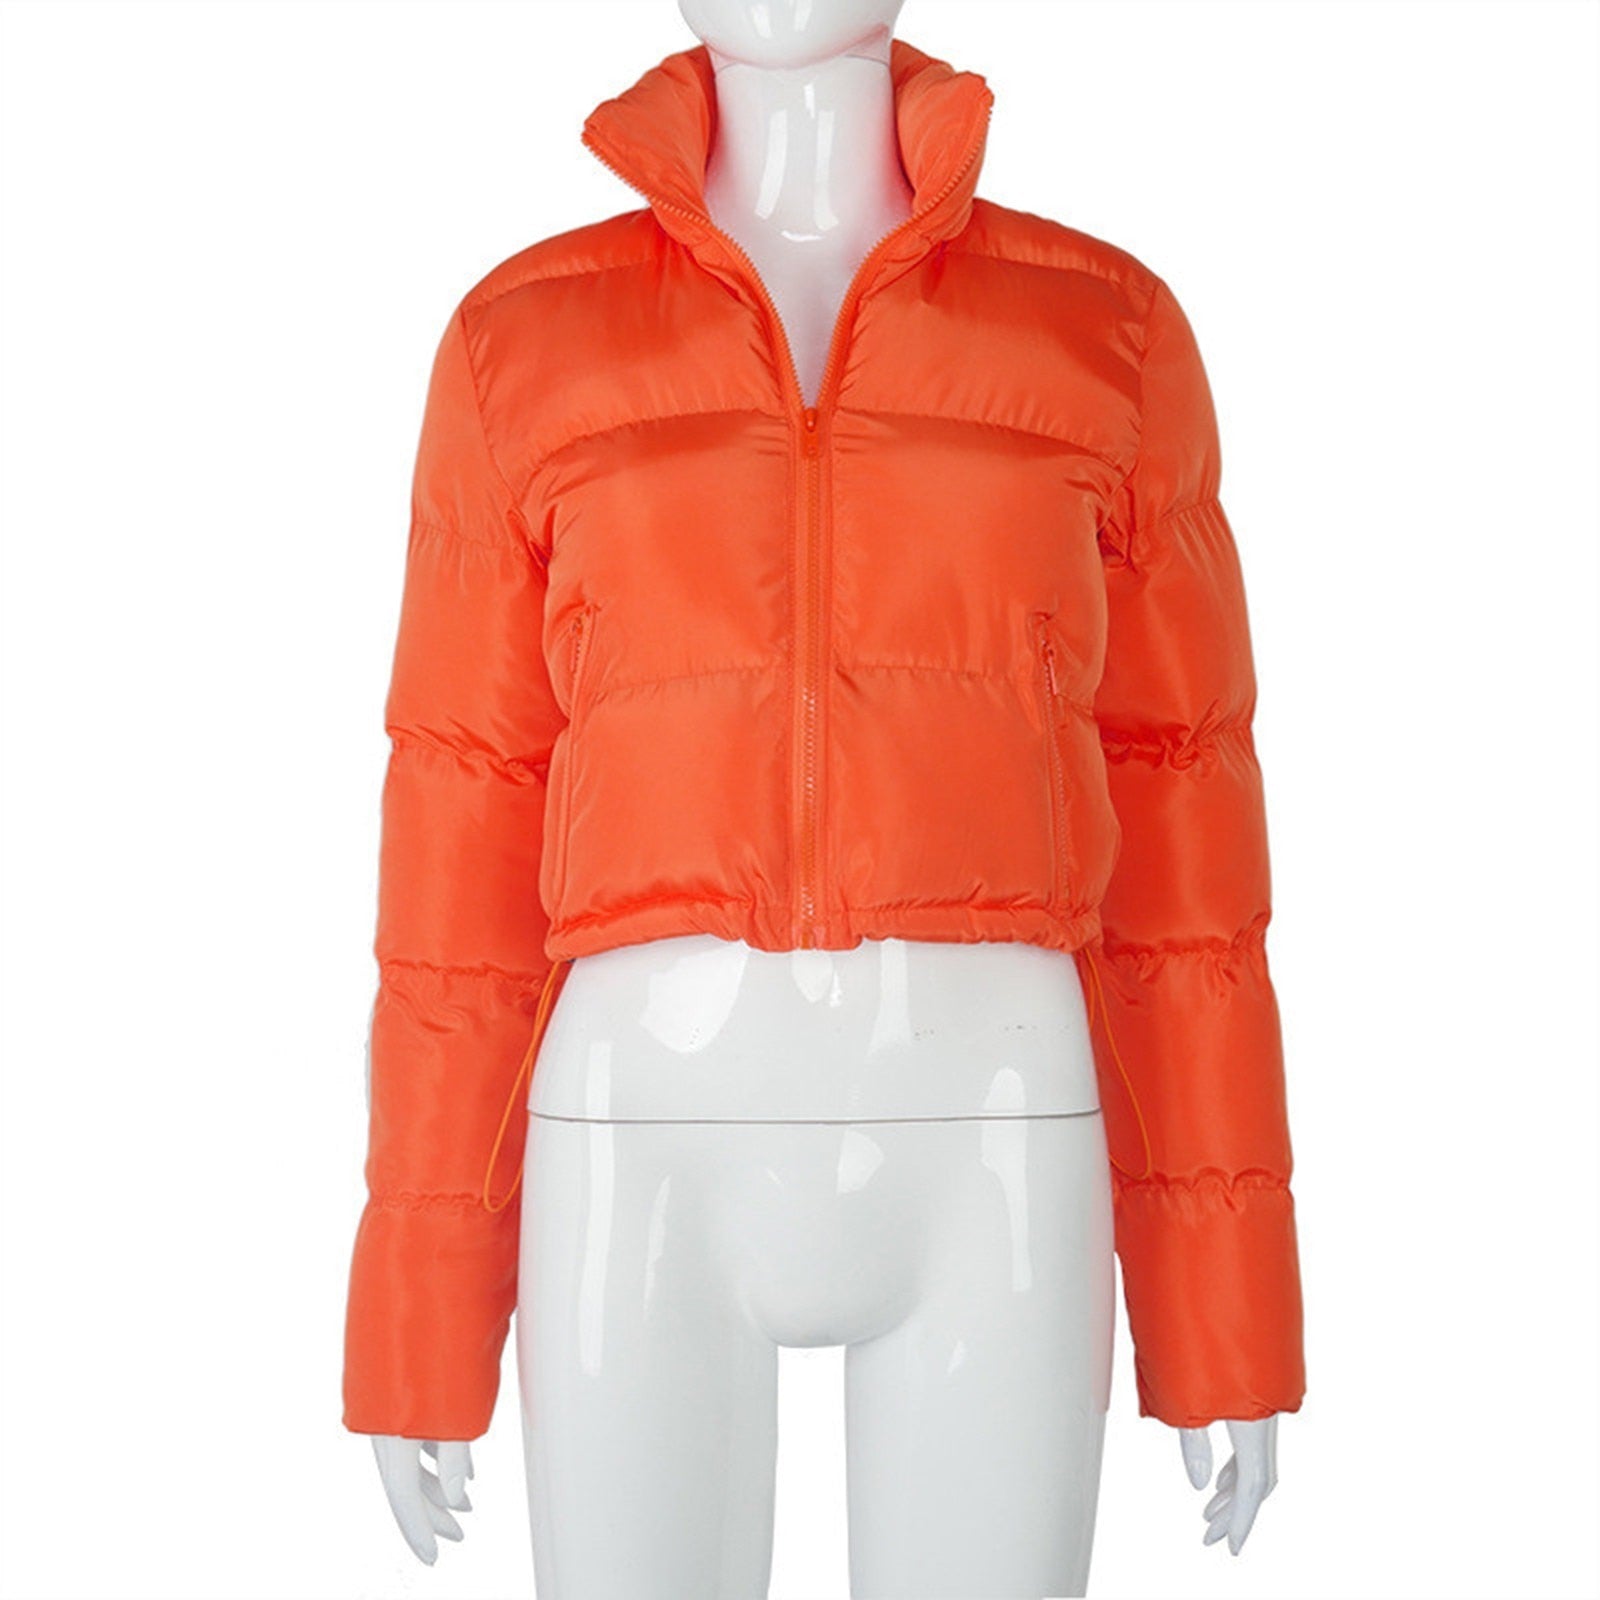 "Down Winter Jacket Warmth & Style for Cold Weather"